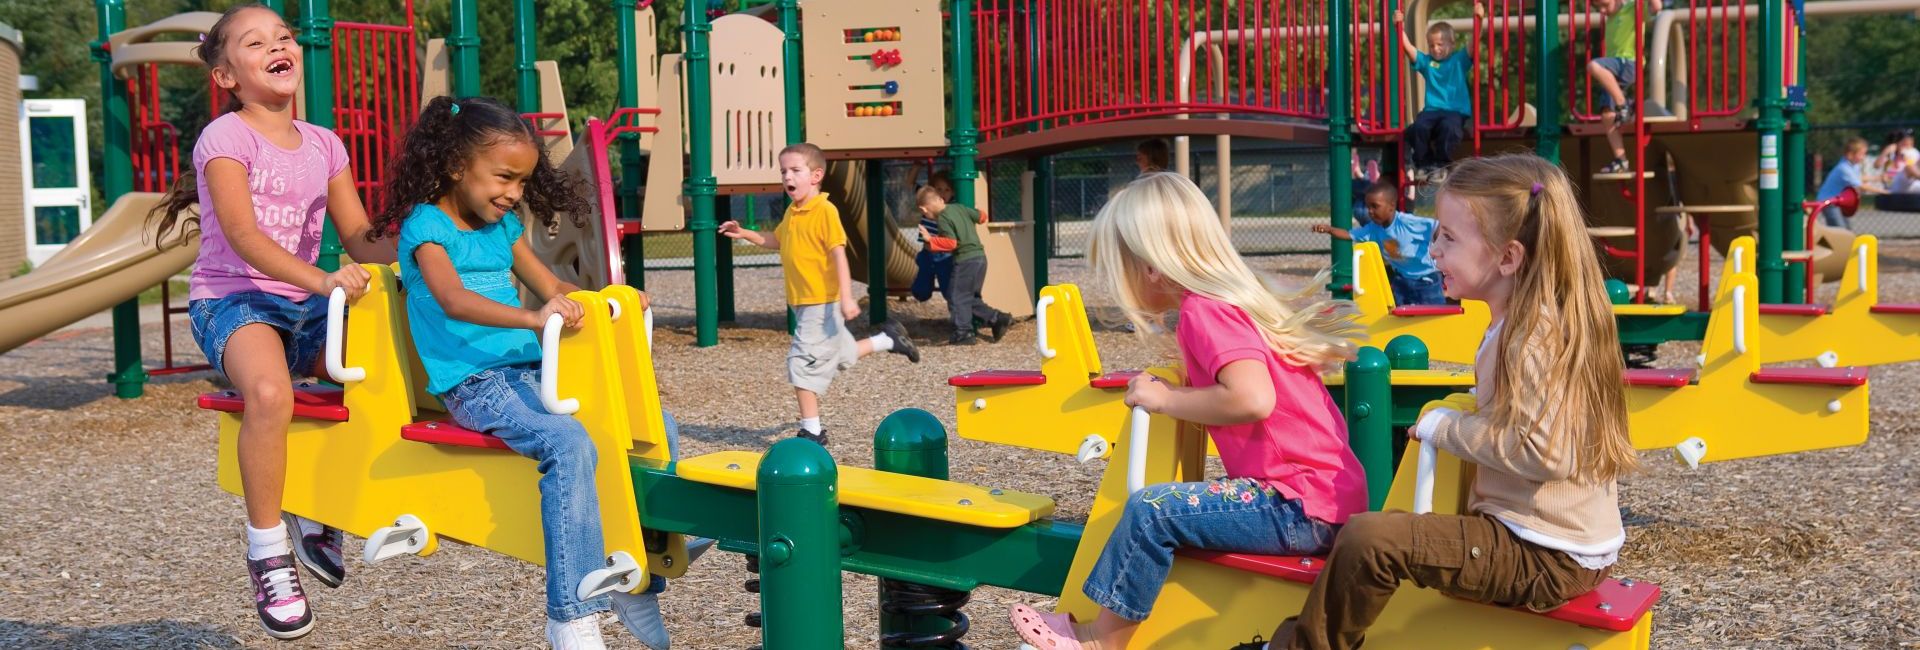 Featured image of Two children playing on yellow seesaw at park